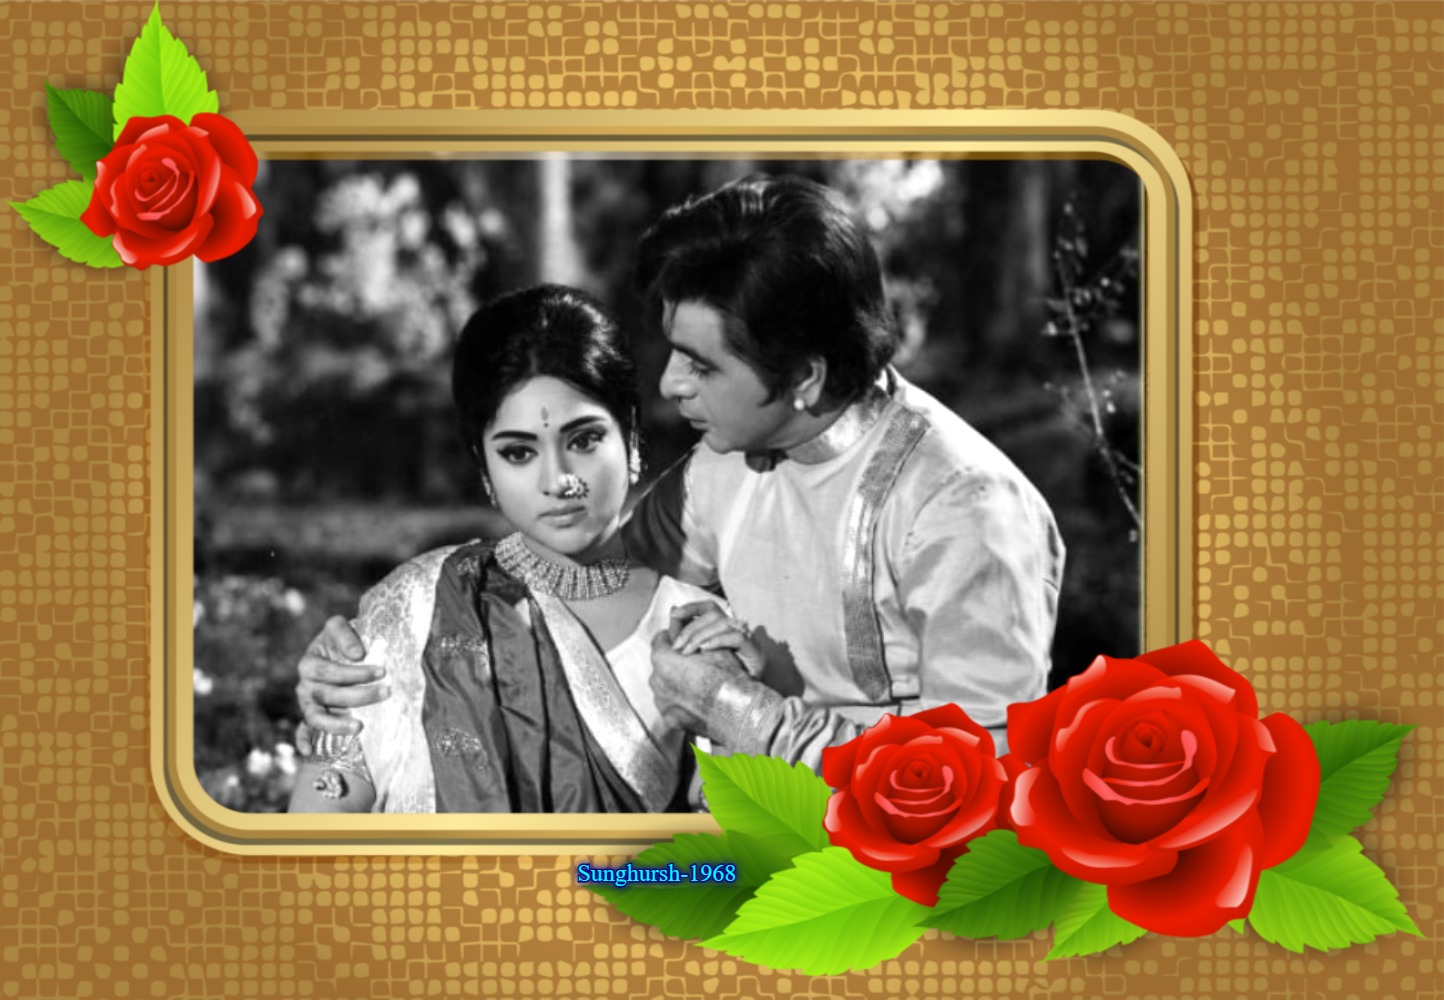 Read more about the article “Romanticism & Social Sentience were Hallmark of His Films”